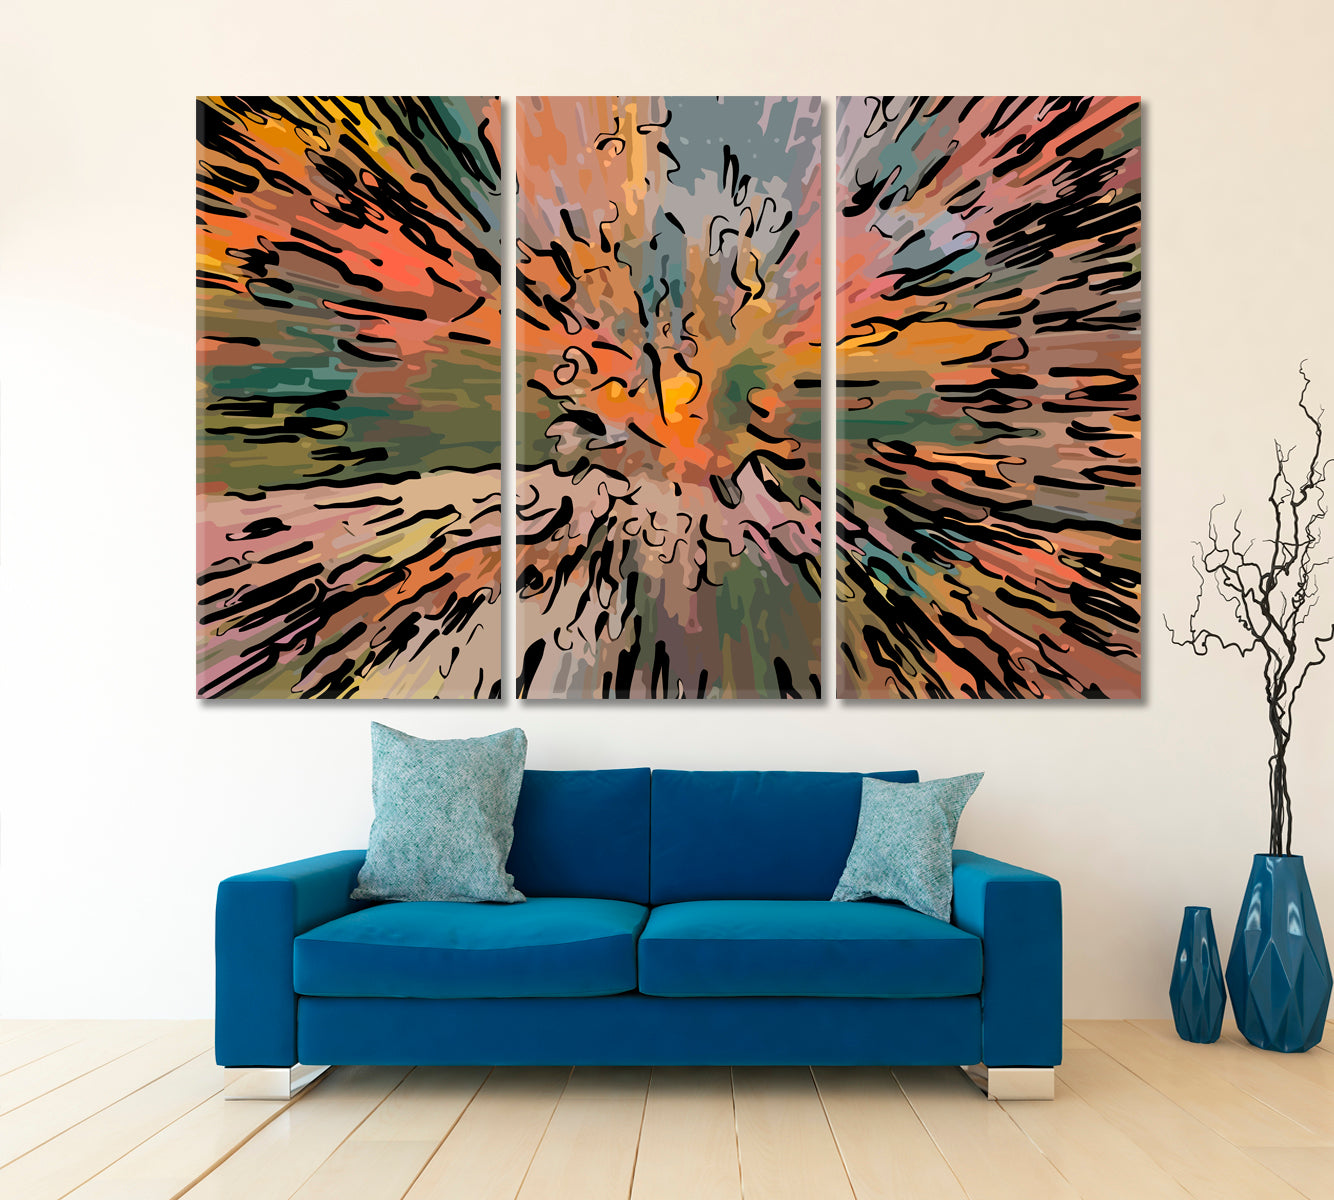 MODERN ART Orange Pale Green Abstract Chaotic Blurred Strokes Abstract Art Print Artesty 3 panels 36" x 24" 